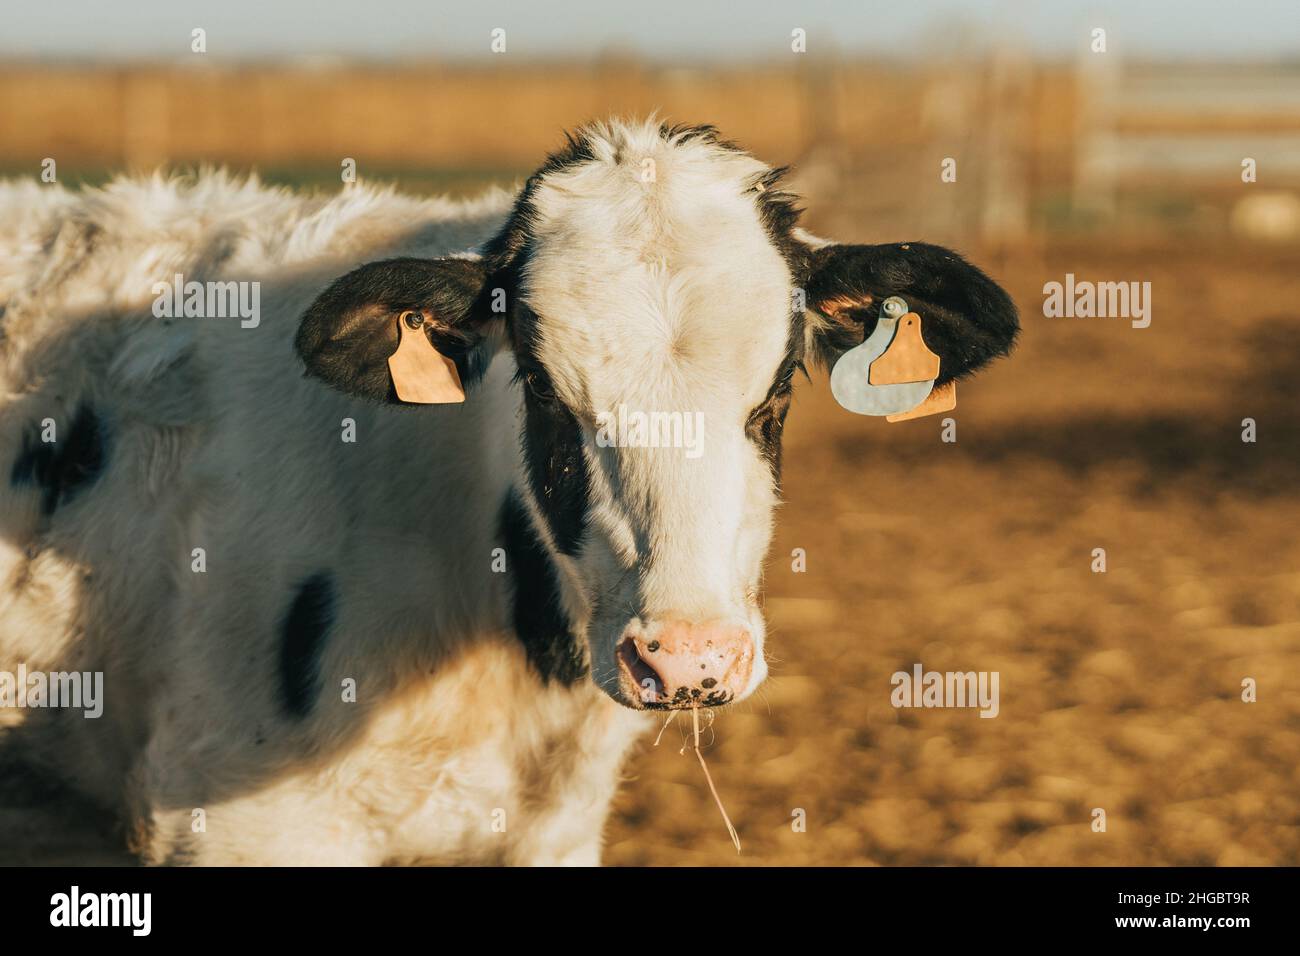 a heifer with ear tags looks at the camera while ruminating on straw Stock Photo